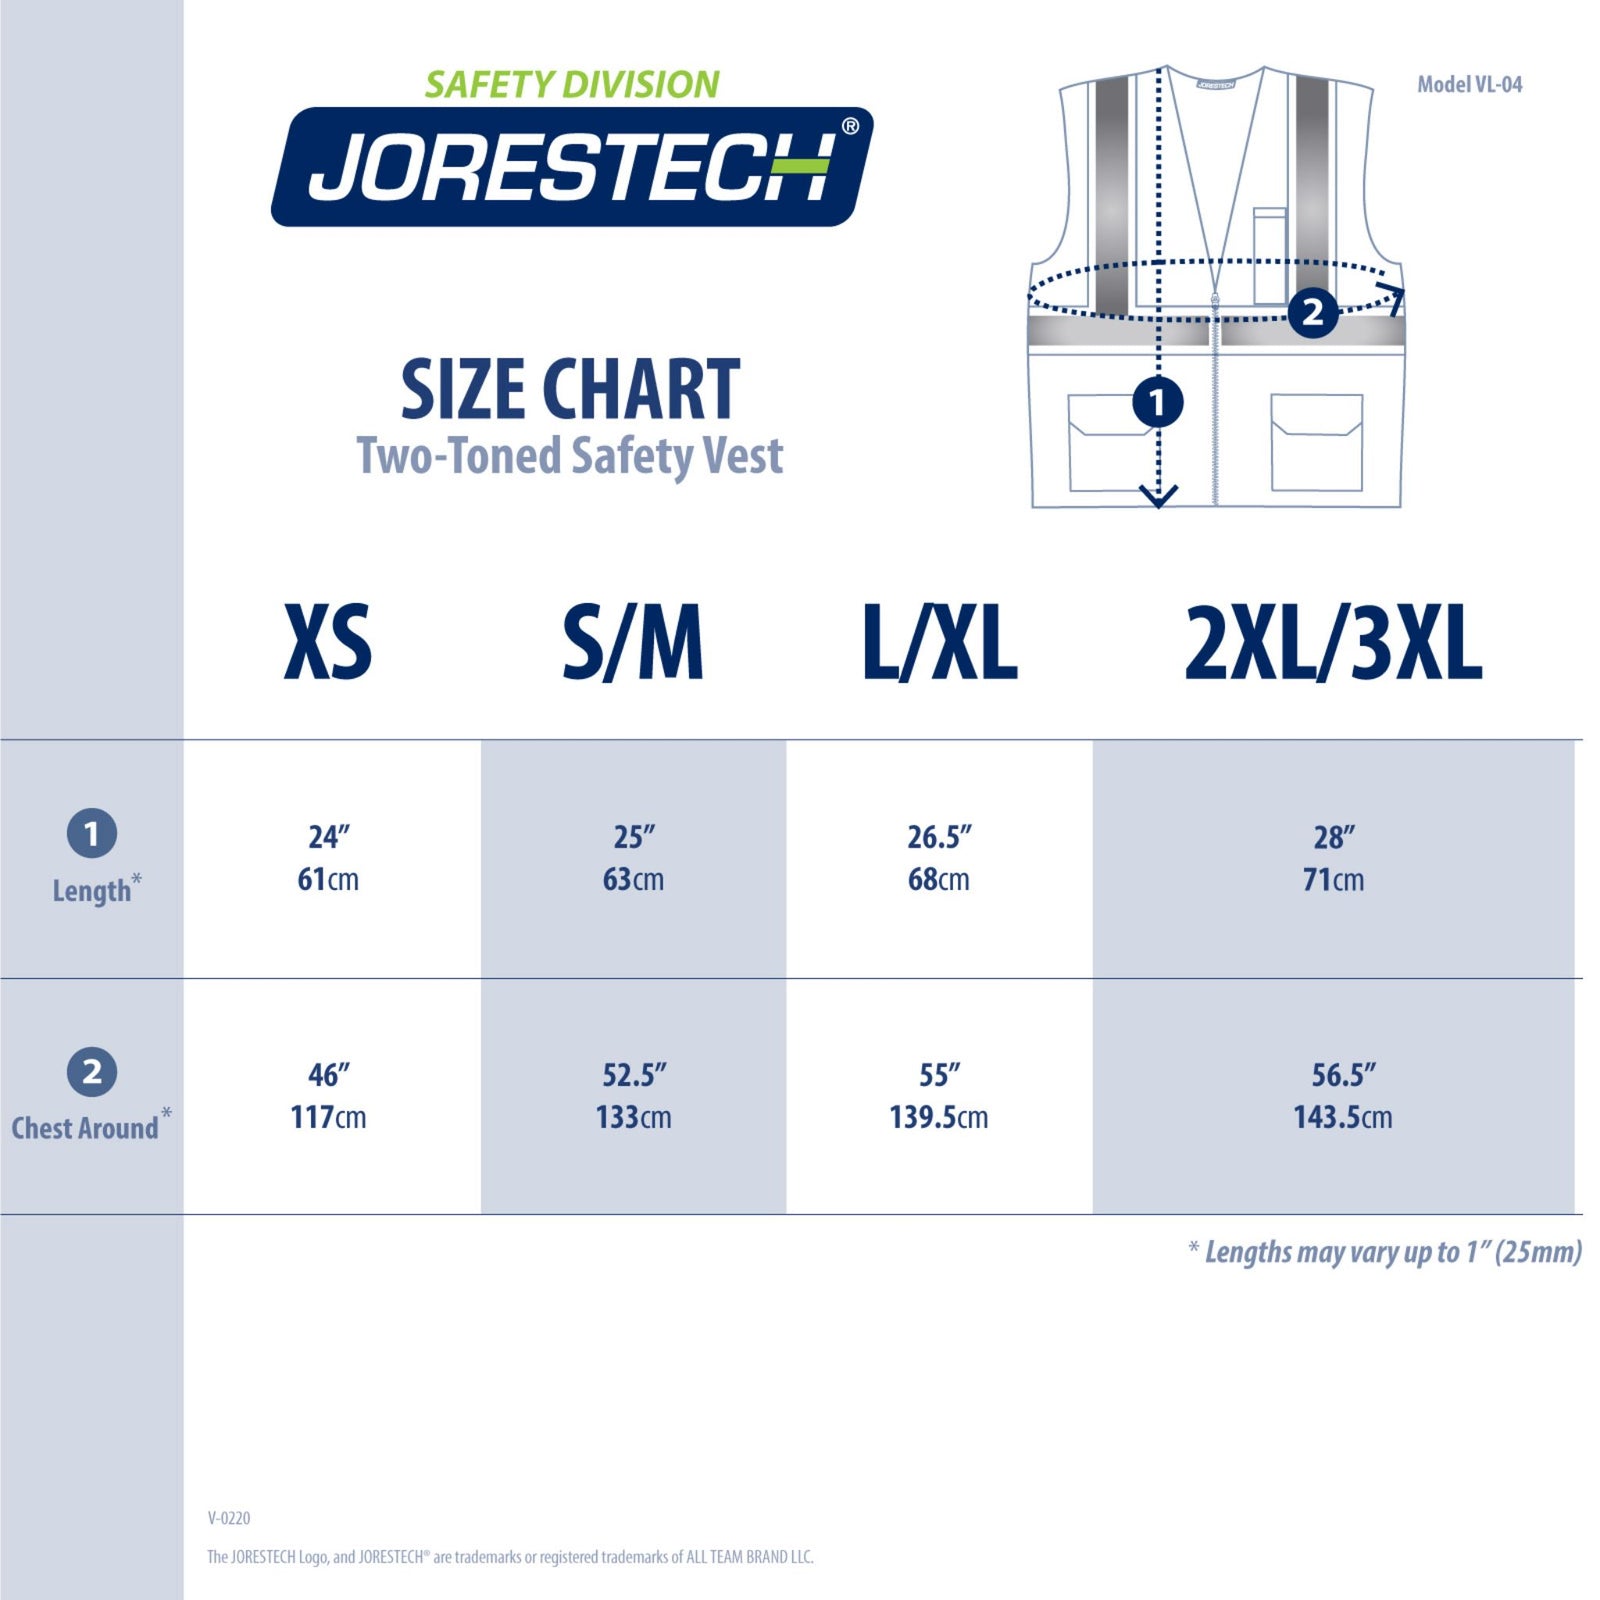 Image of the size chart of the JORESTECH hi vis safety chart with reflective strips